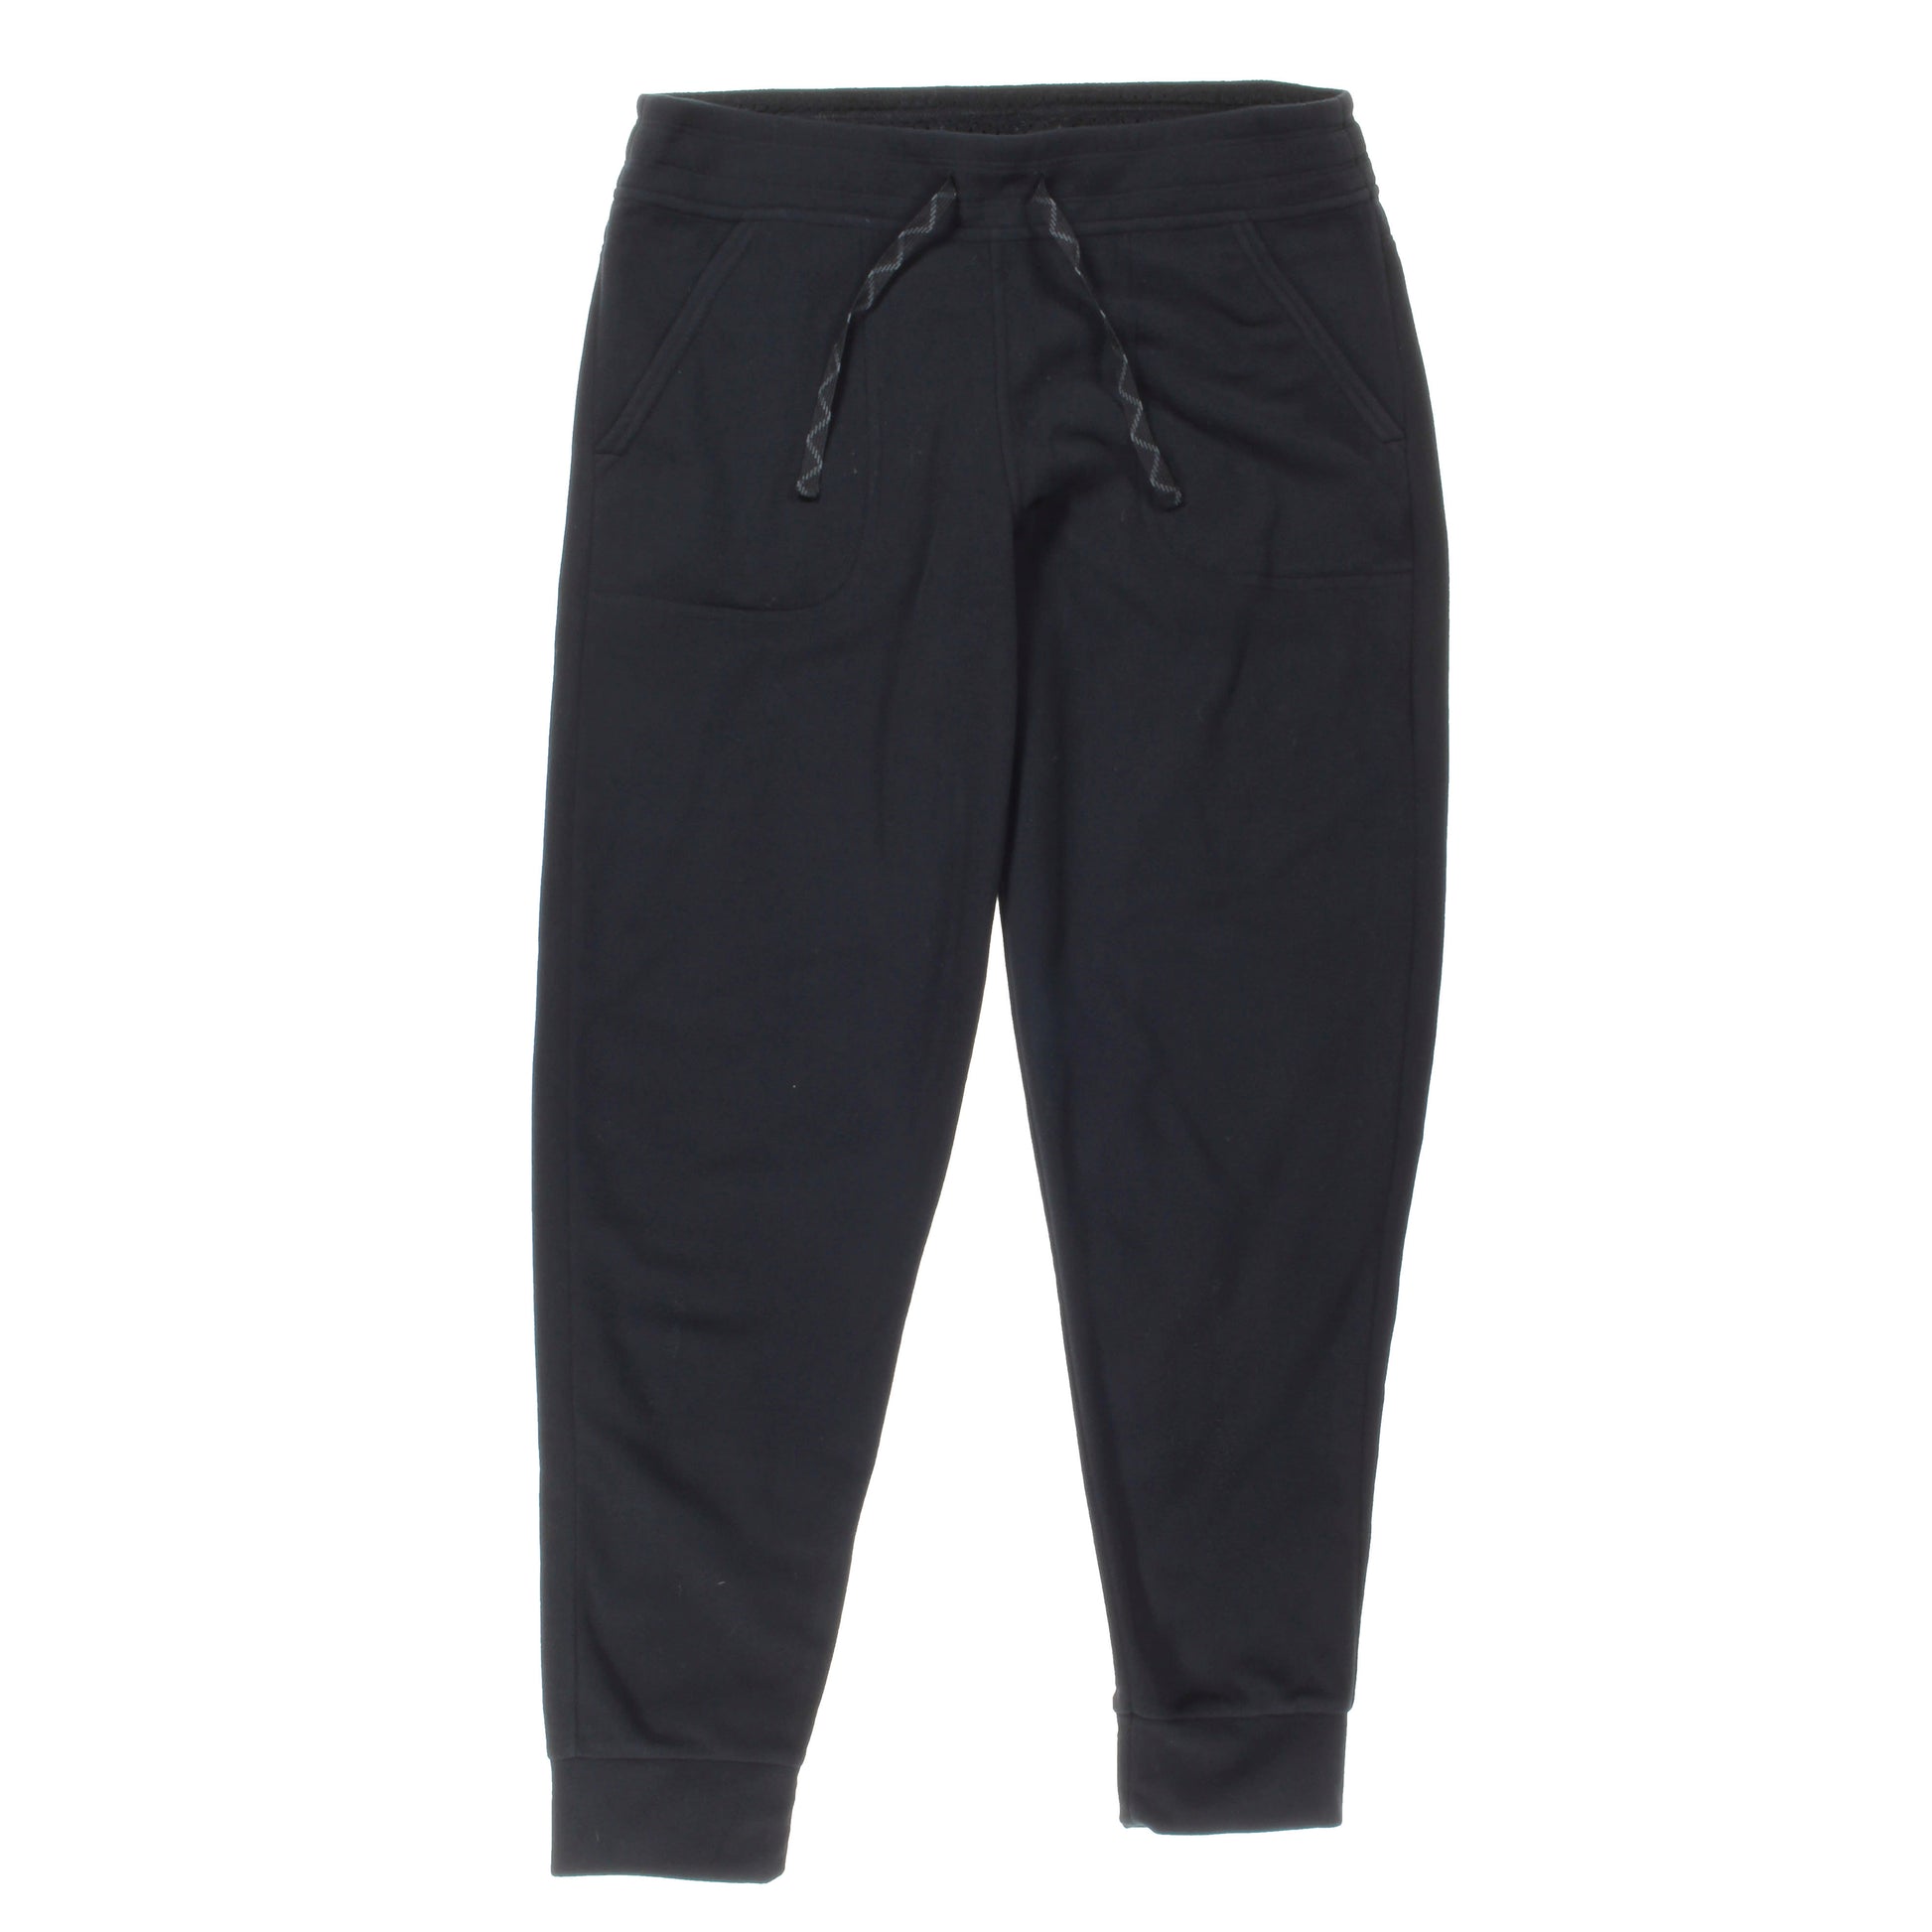 Patagonia Women's Snap-T Fleece Pants 22000_FEA_OM1 - Duranglers Fly  Fishing Shop & Guides